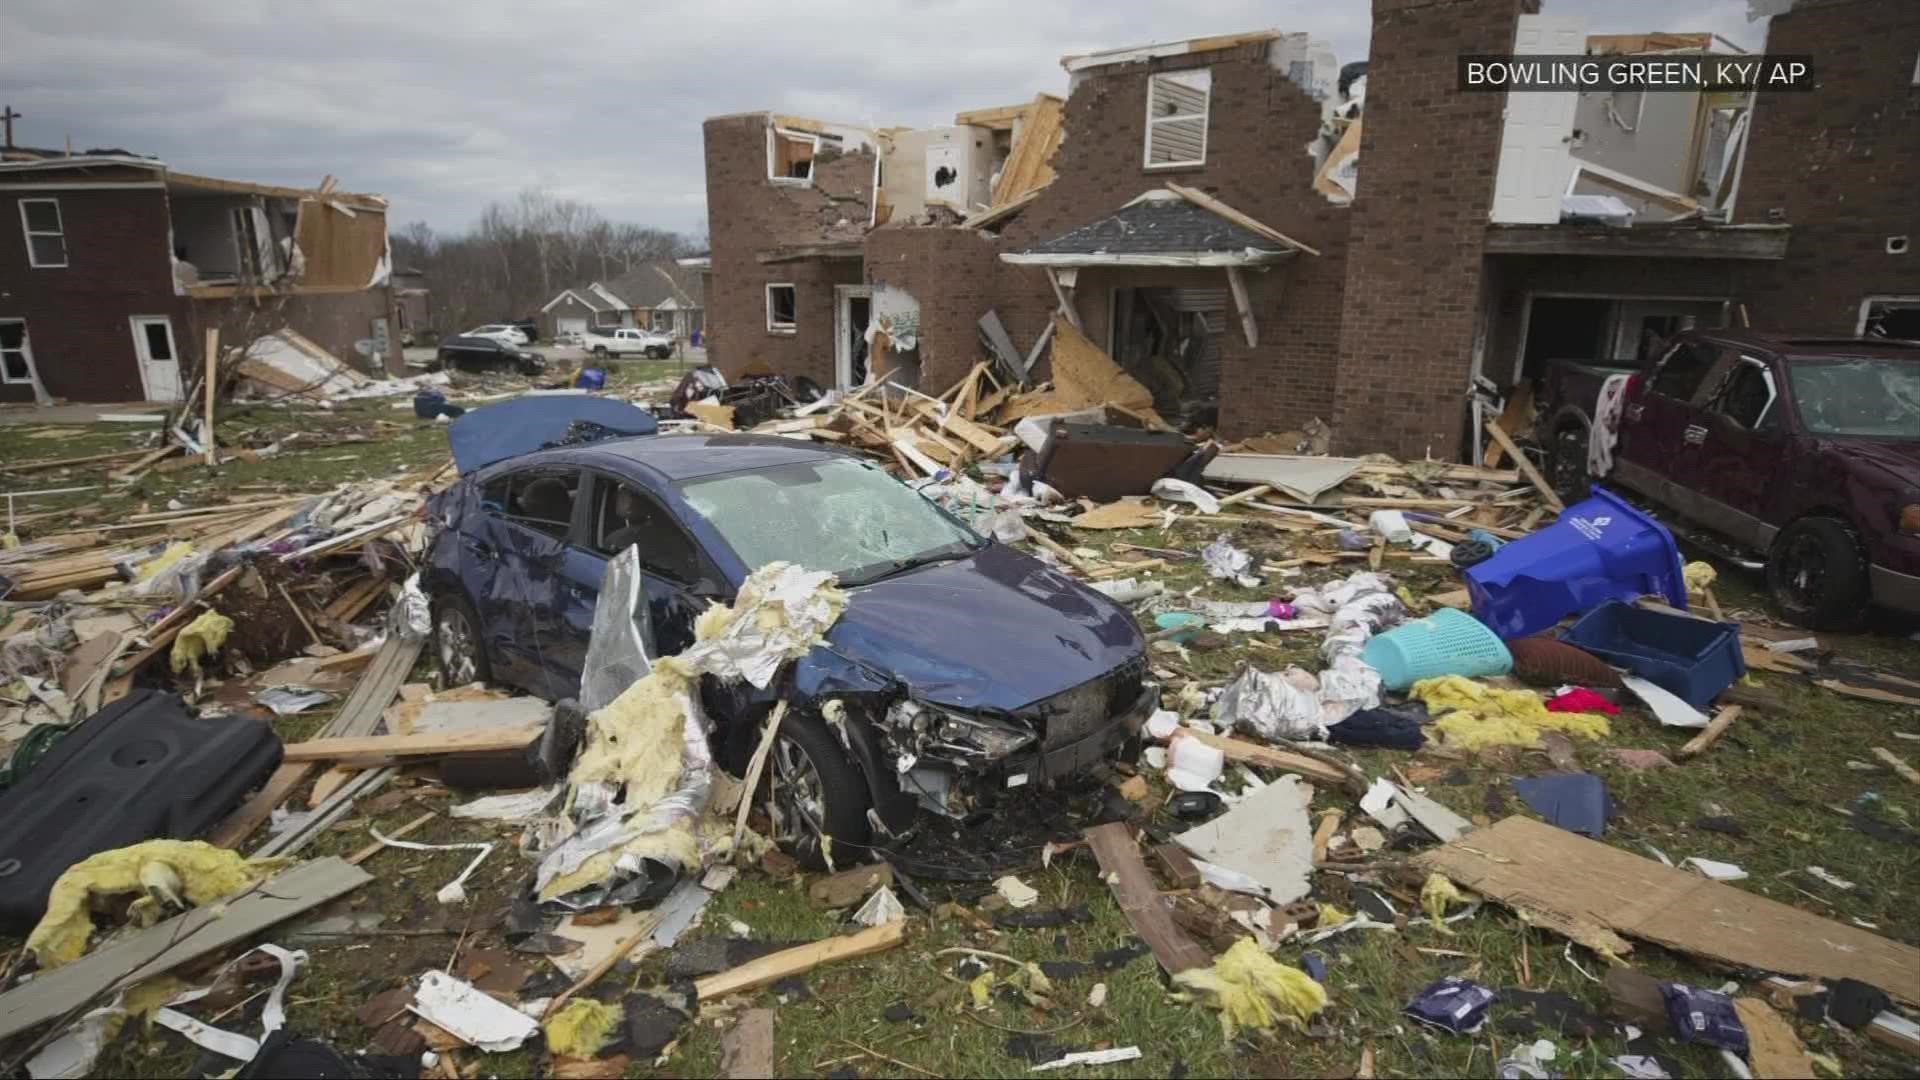 Aid is being given to tornado victims in Kentucky, Arkansas, Illinois, Missouri and Tennessee.